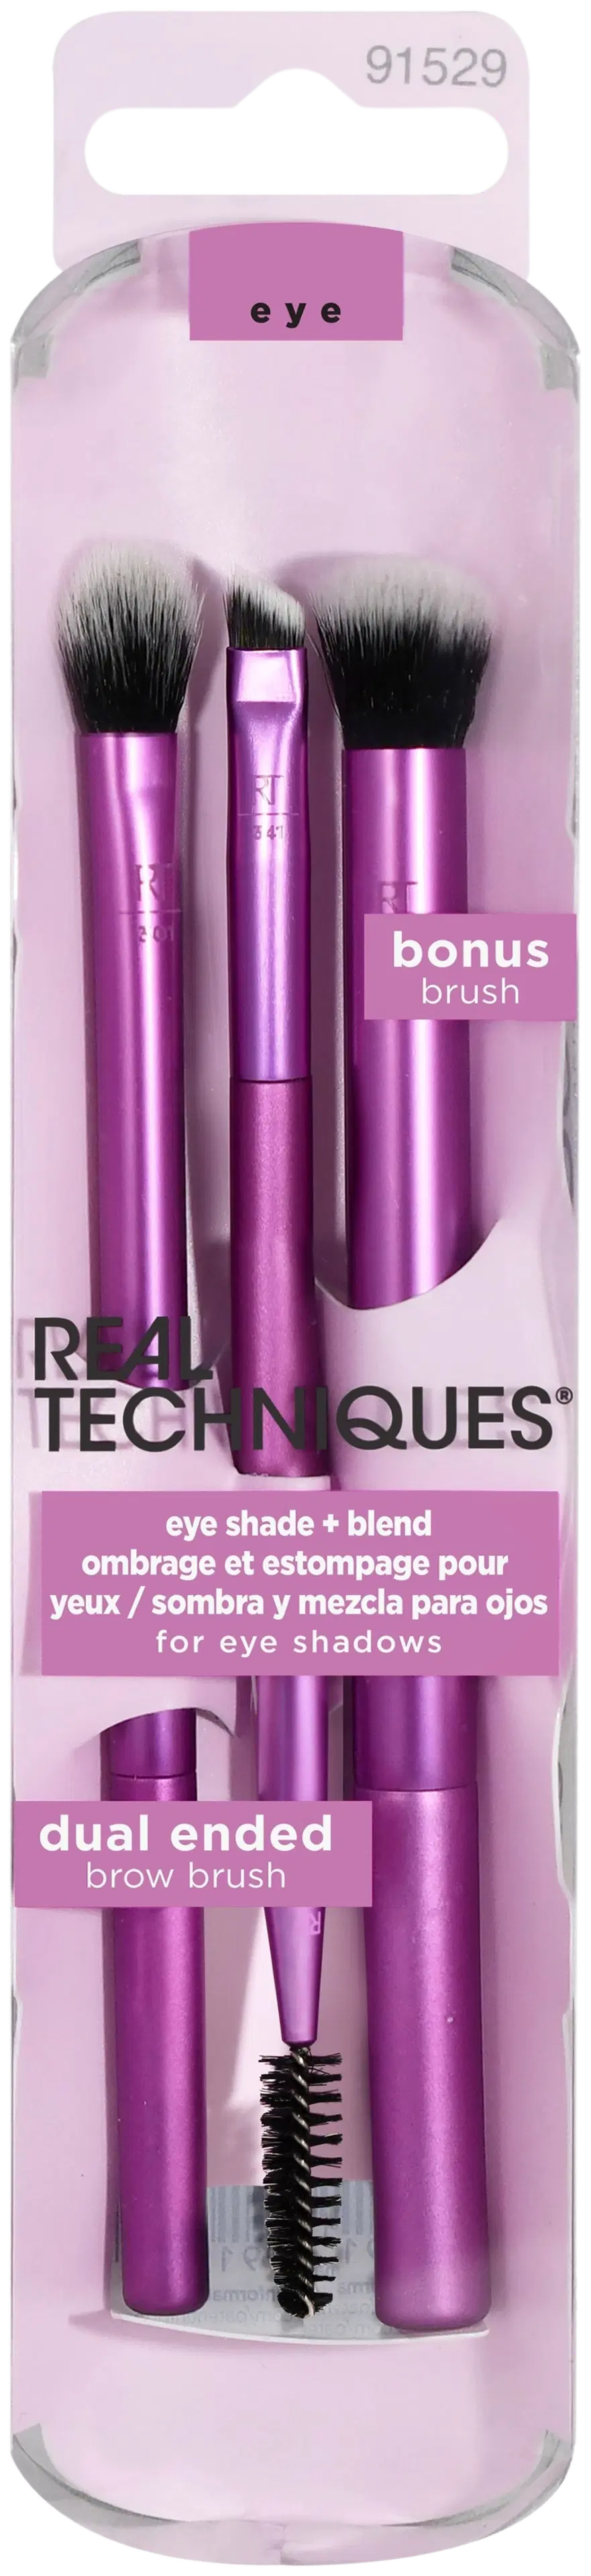 Real Techniques Eye Shade + Blend - luomivärisivellintrio